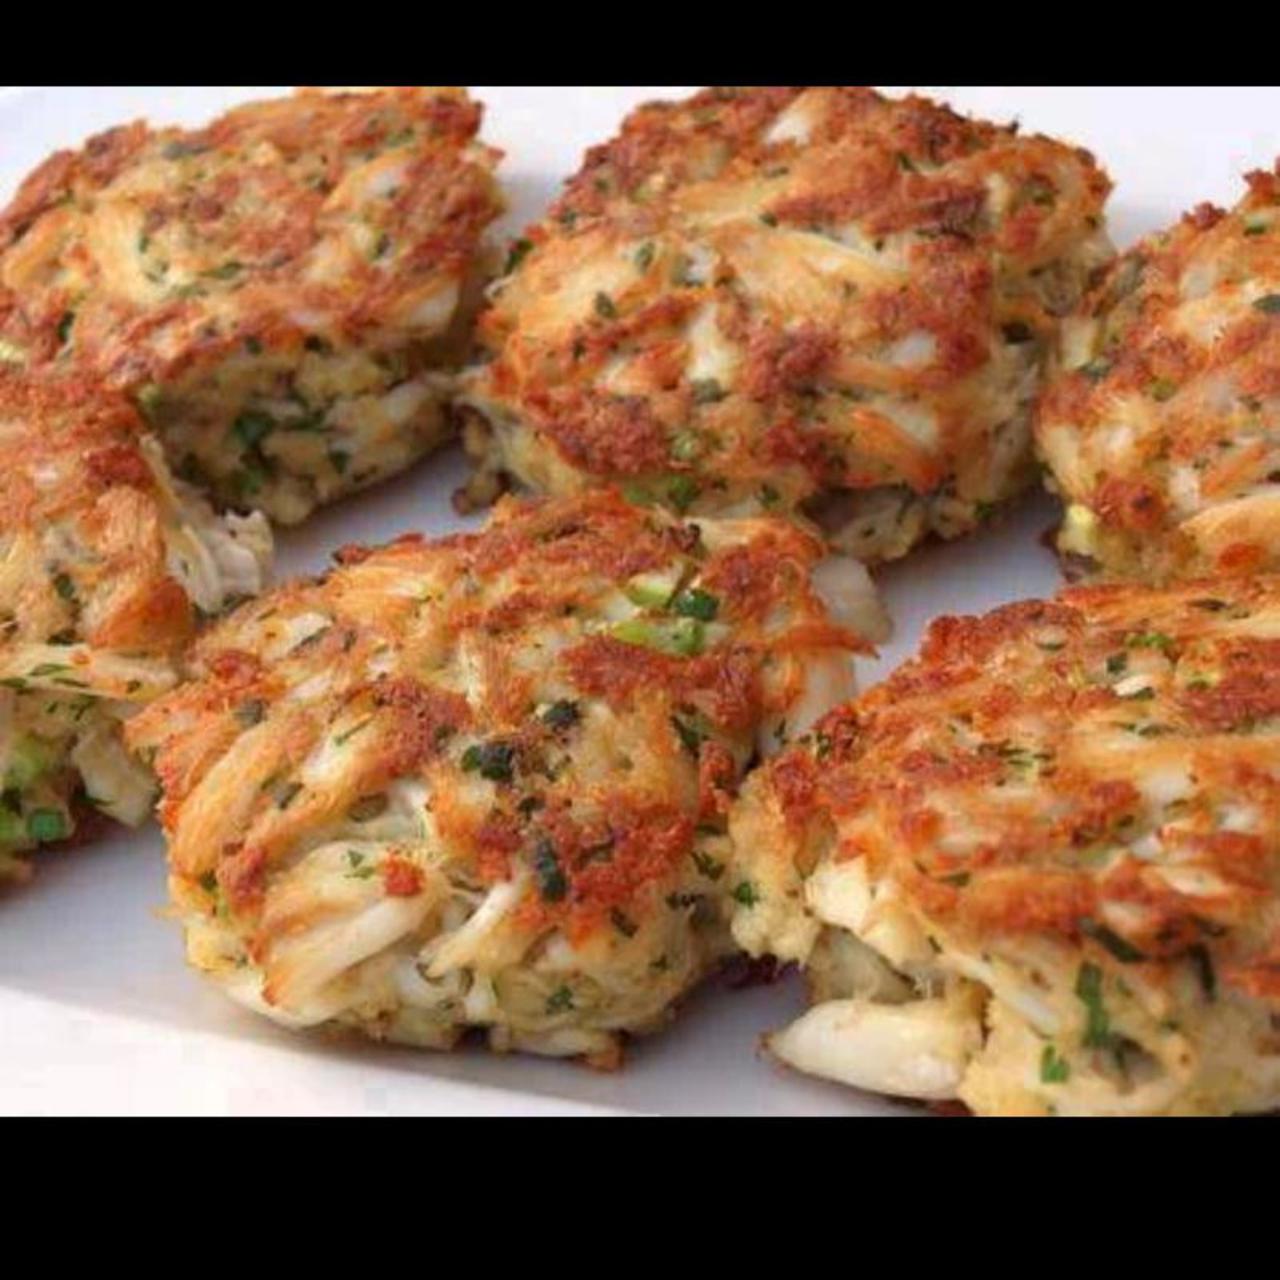 Best Crab Cake Recipe In The World - World Map